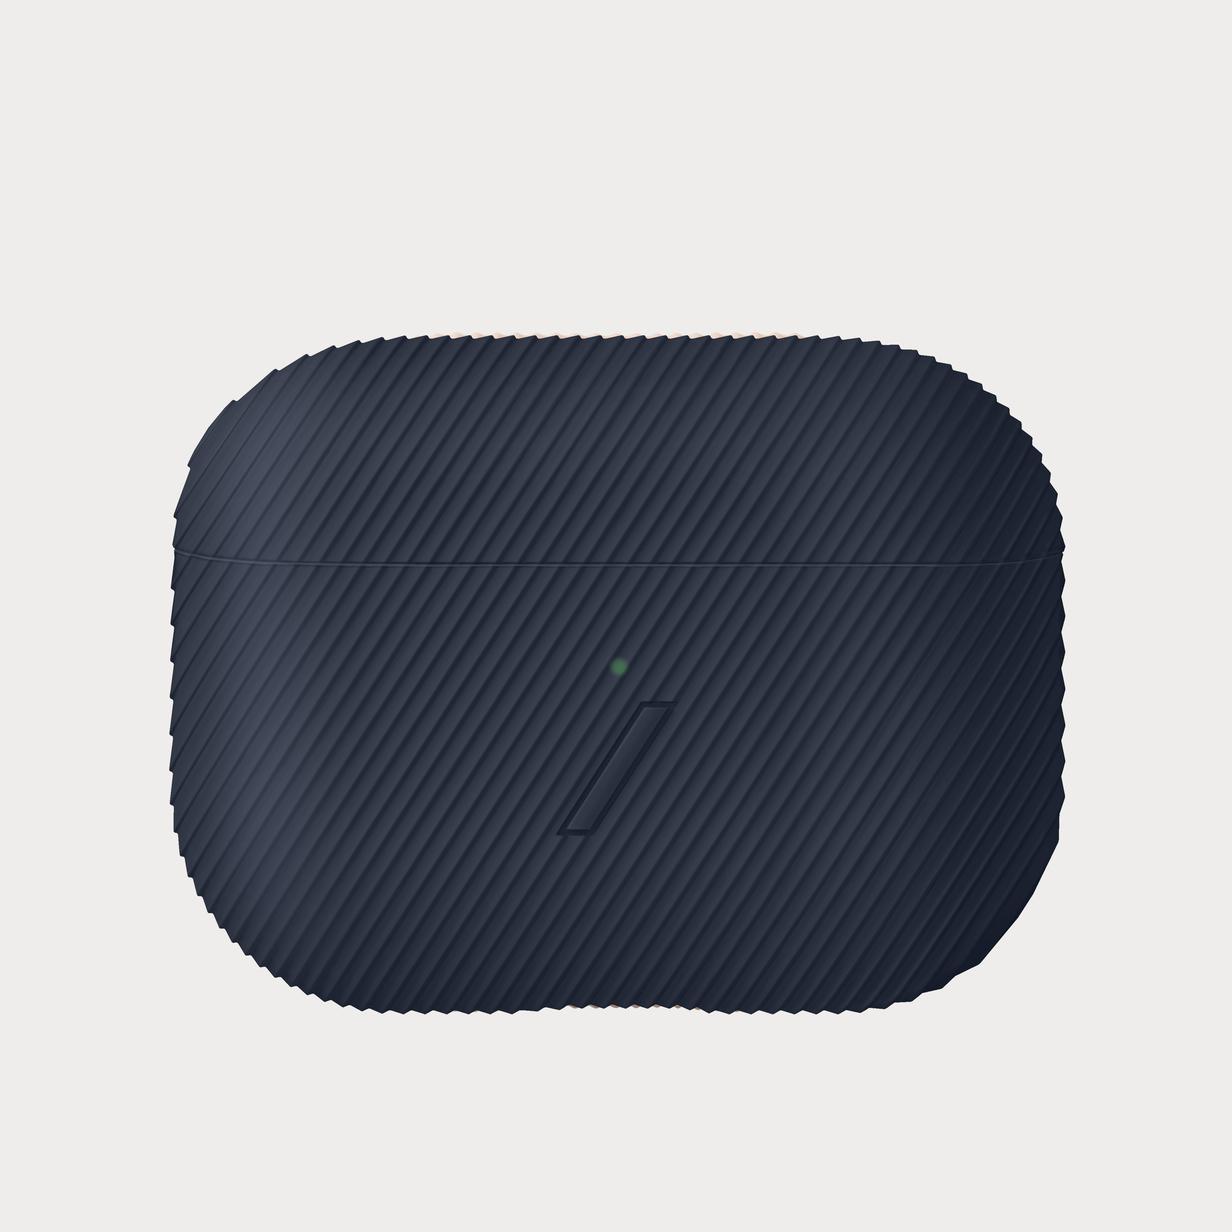 Moment Native Union APPRO CRVE NAV Curve Case for Airpods Pro Indigo 01